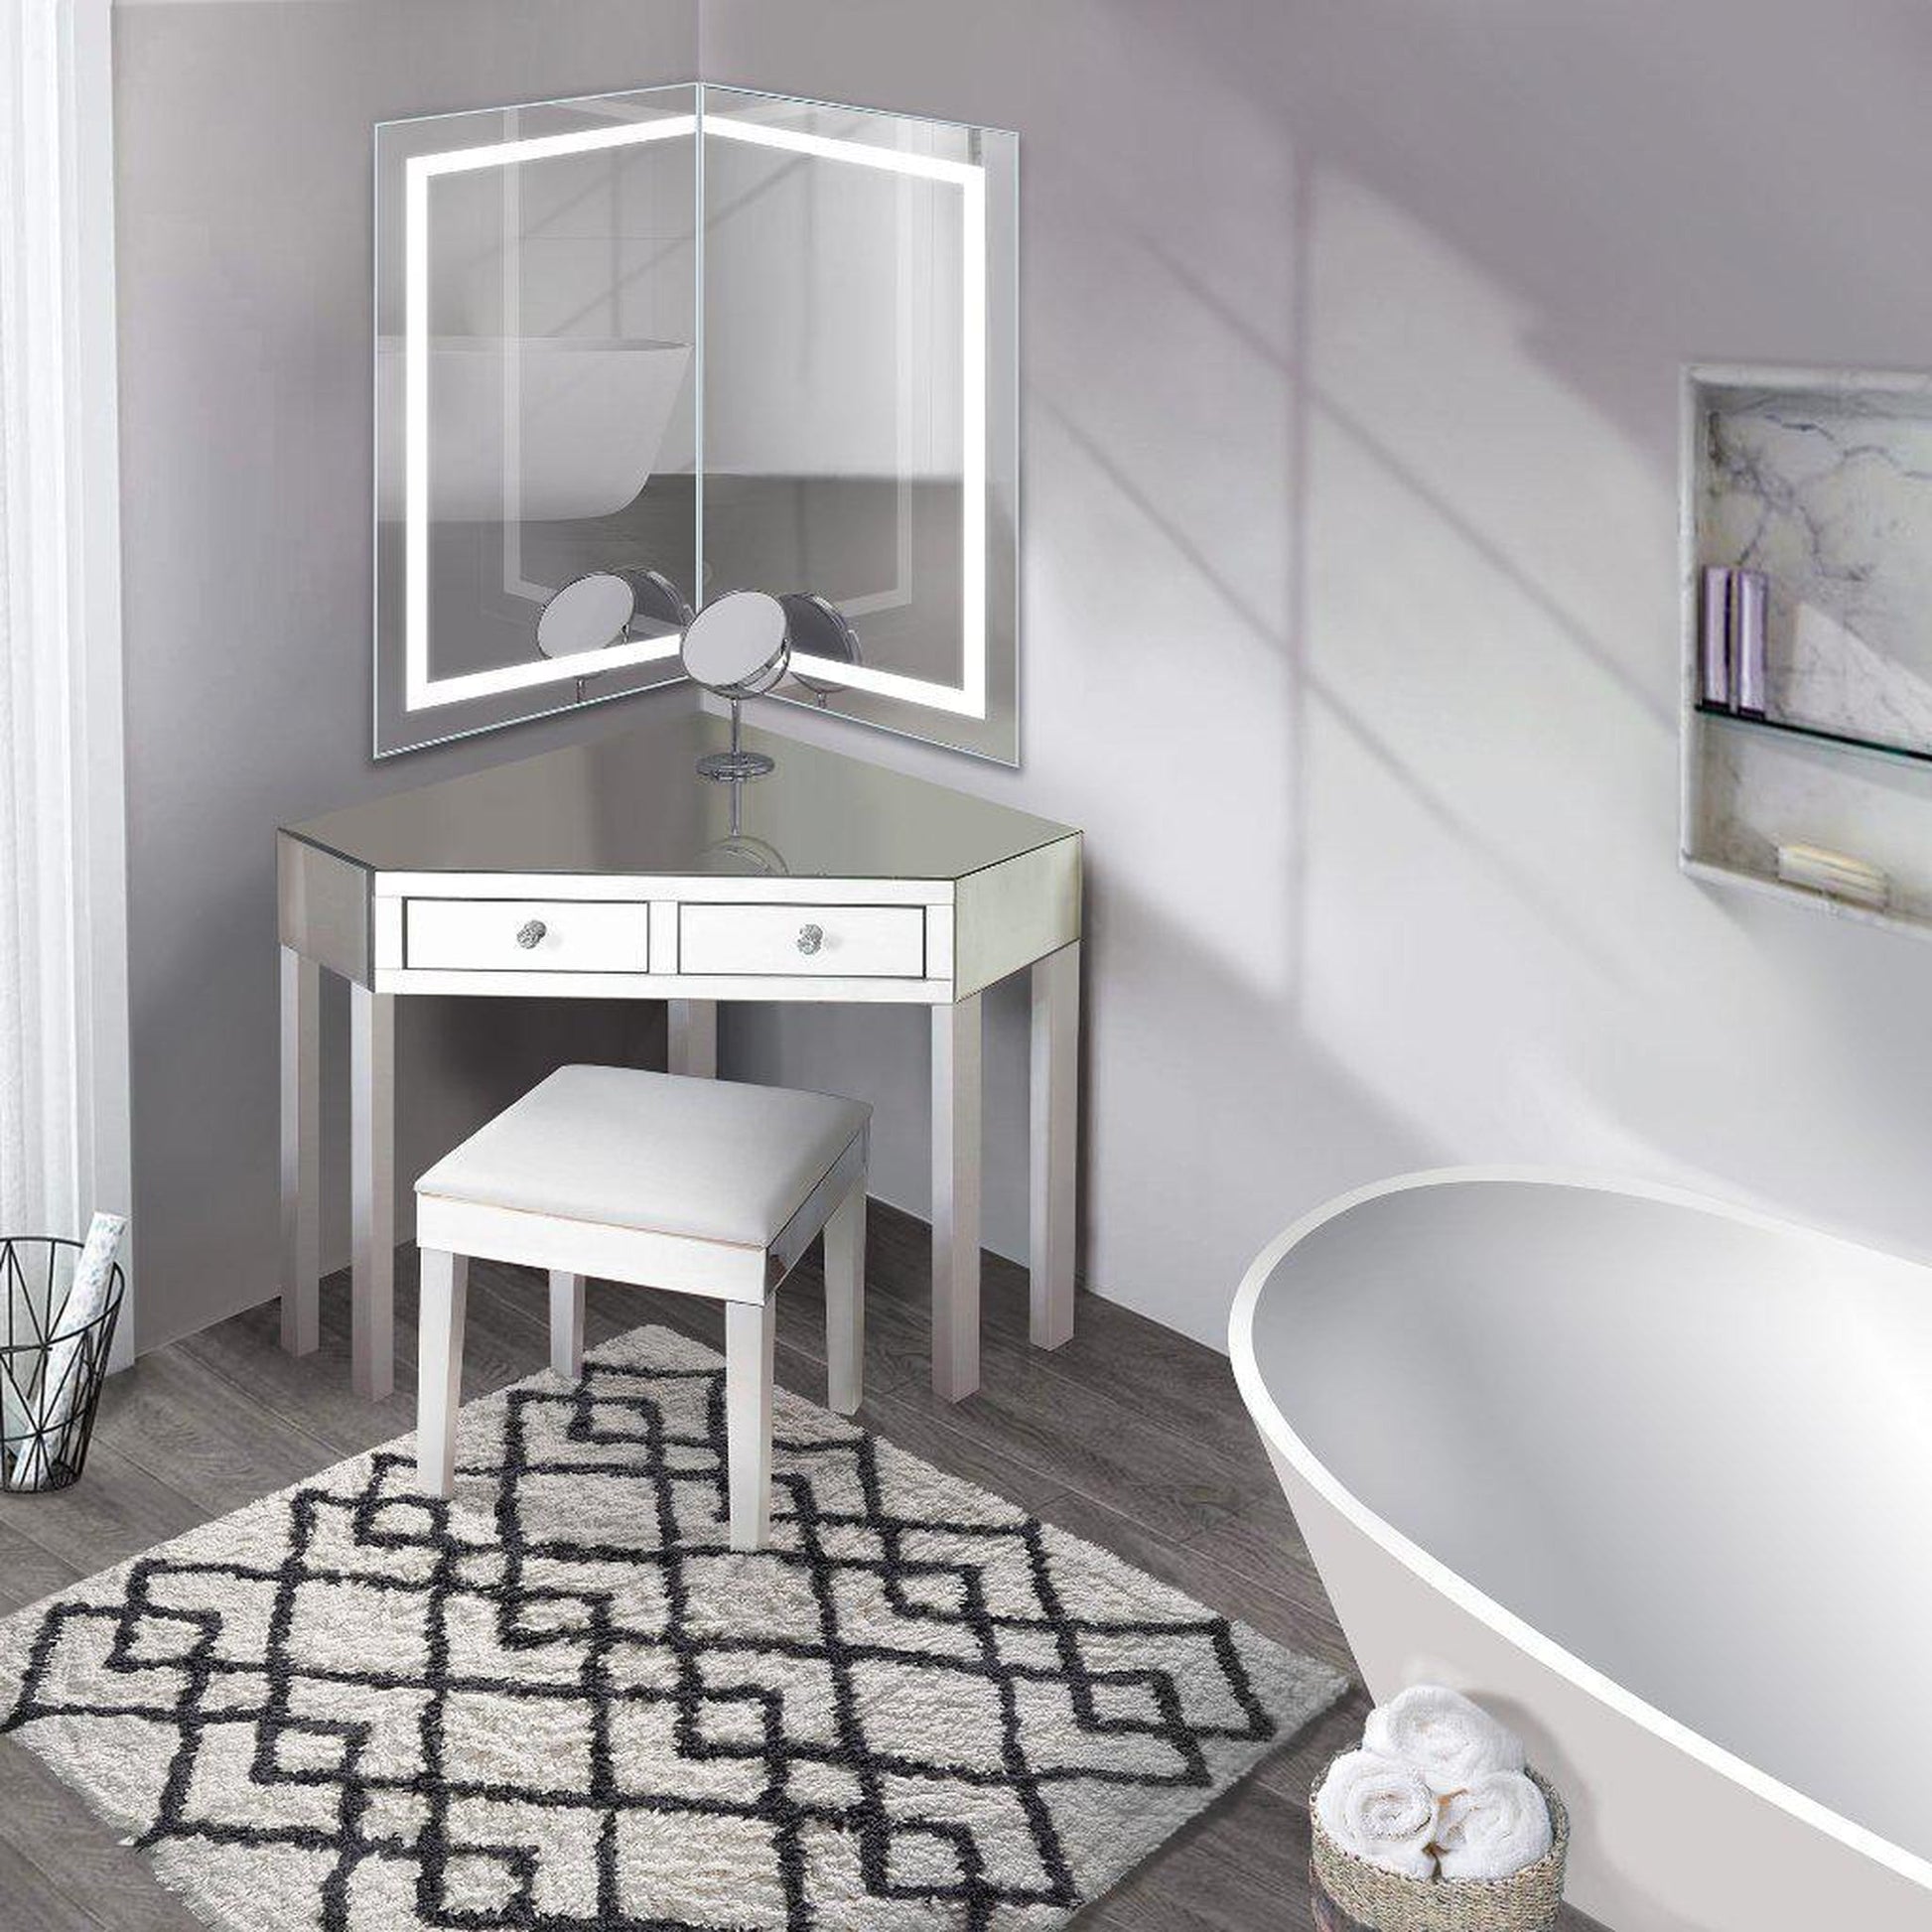 https://usbathstore.com/cdn/shop/products/Krugg-Reflections-Mod-42-x-36-21D-5000K-Rectangular-Modular-Corner-Wall-Mounted-Silver-Backed-LED-Bathroom-Vanity-Mirror-With-Built-in-Defogger-and-Dimmer-3.jpg?v=1681902524&width=1946